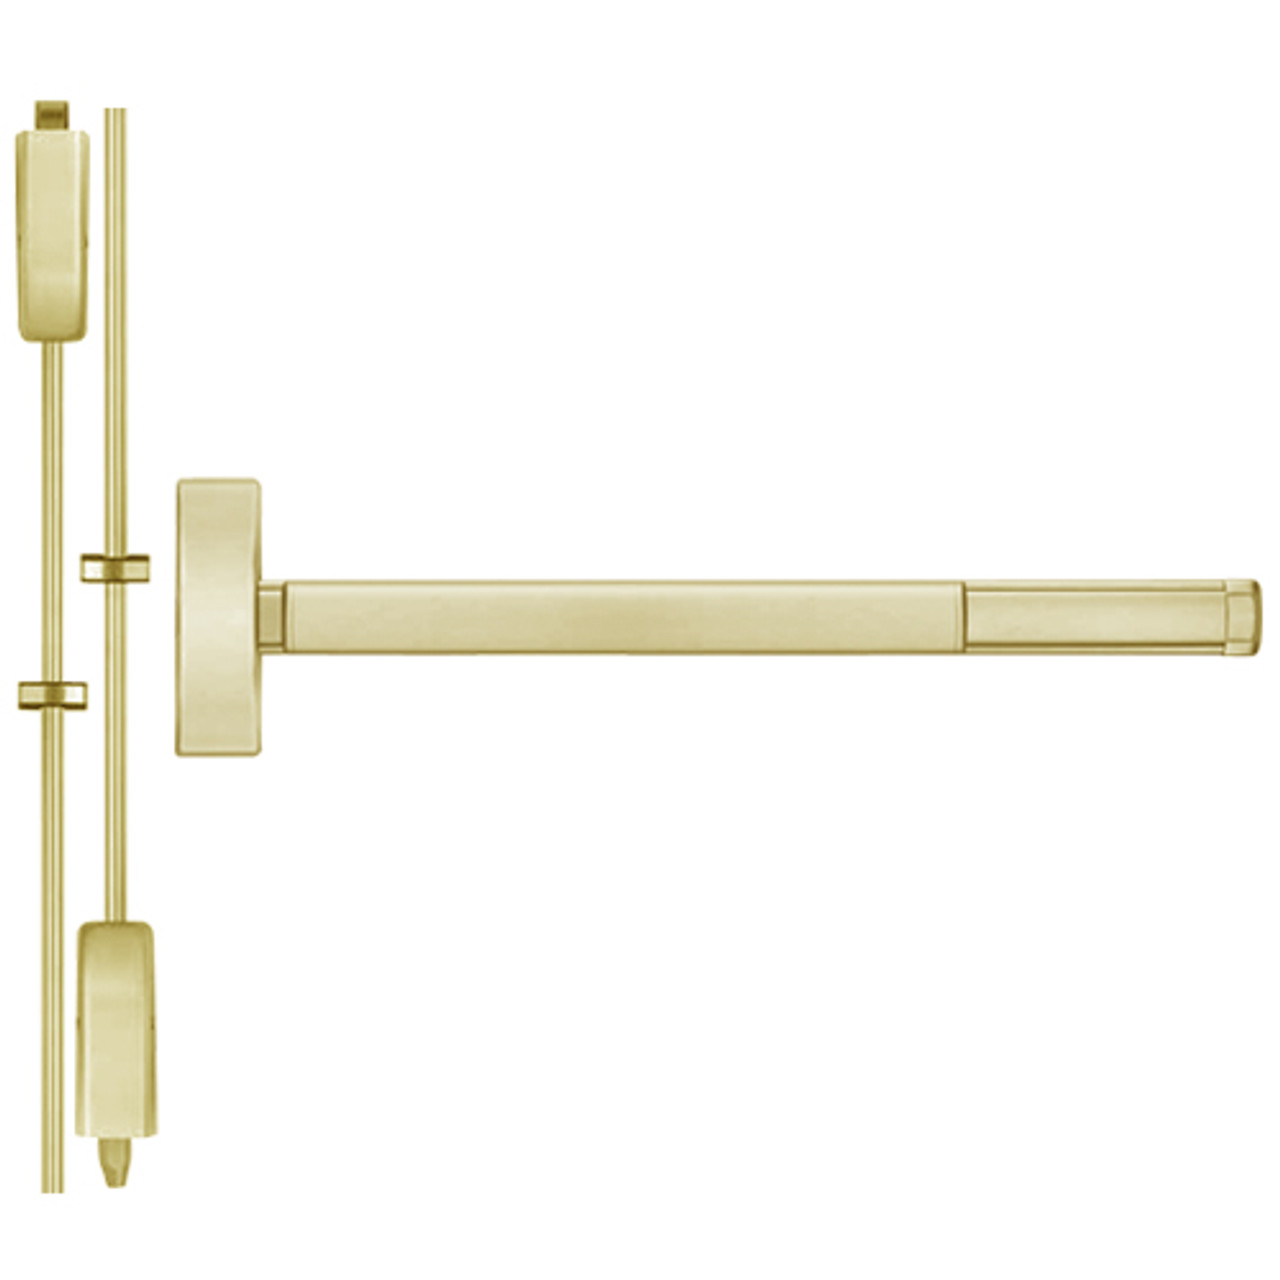 DE2201LBR-606-48 PHI 2200 Series Non Fire Rated Apex Surface Vertical Rod Device with Delayed Egress Prepped for Cover Plate in Satin Brass Finish